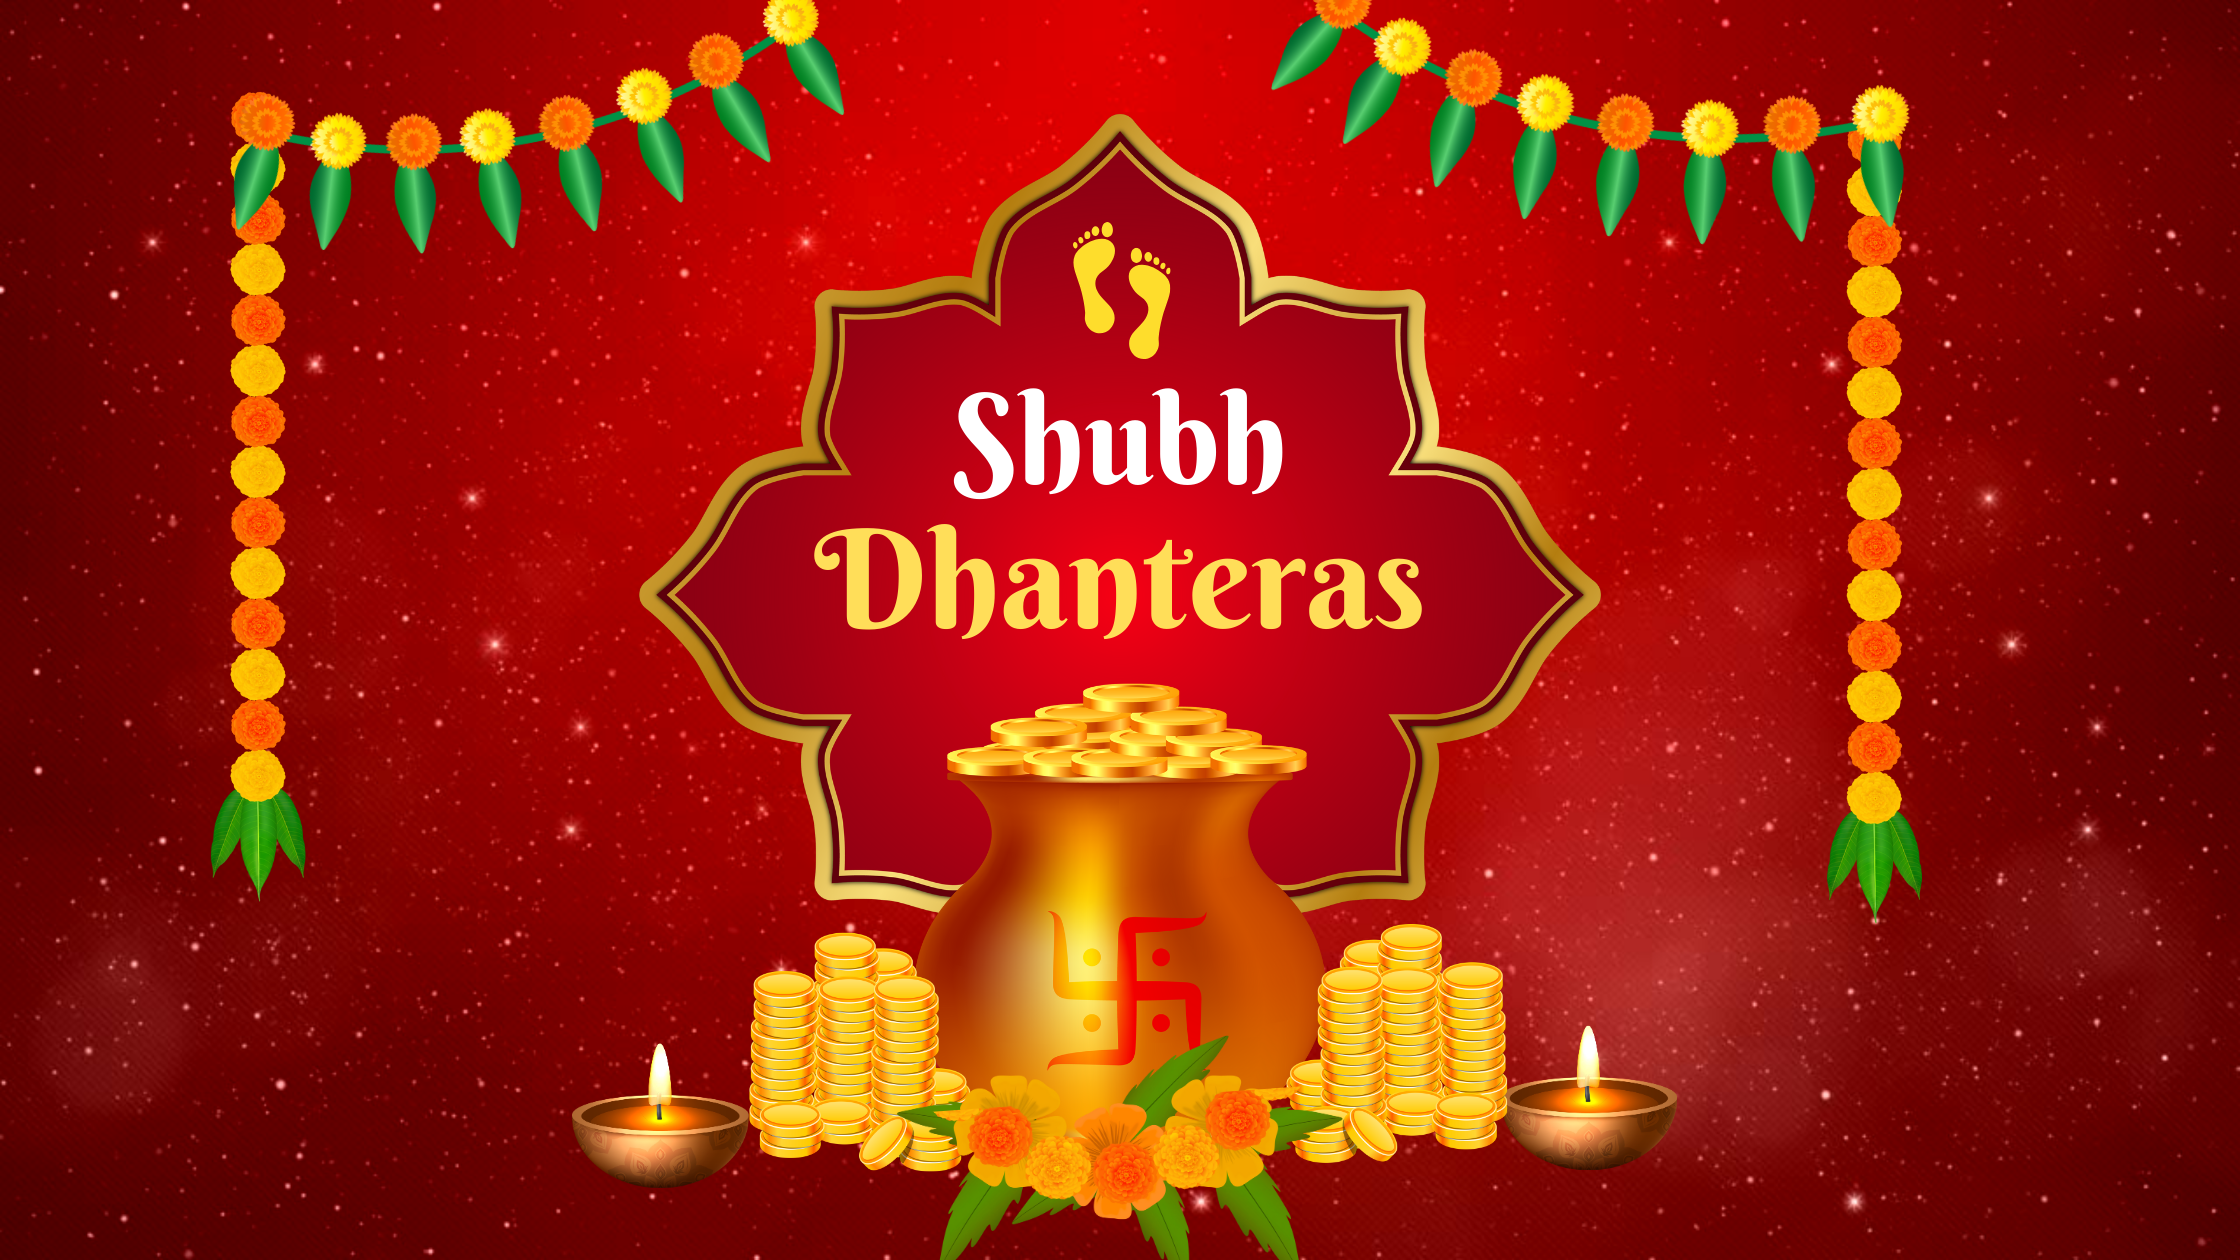 Dhanteras 2023 Proven Rituals and Beliefs to follow- Know the Significance of Buying Salt